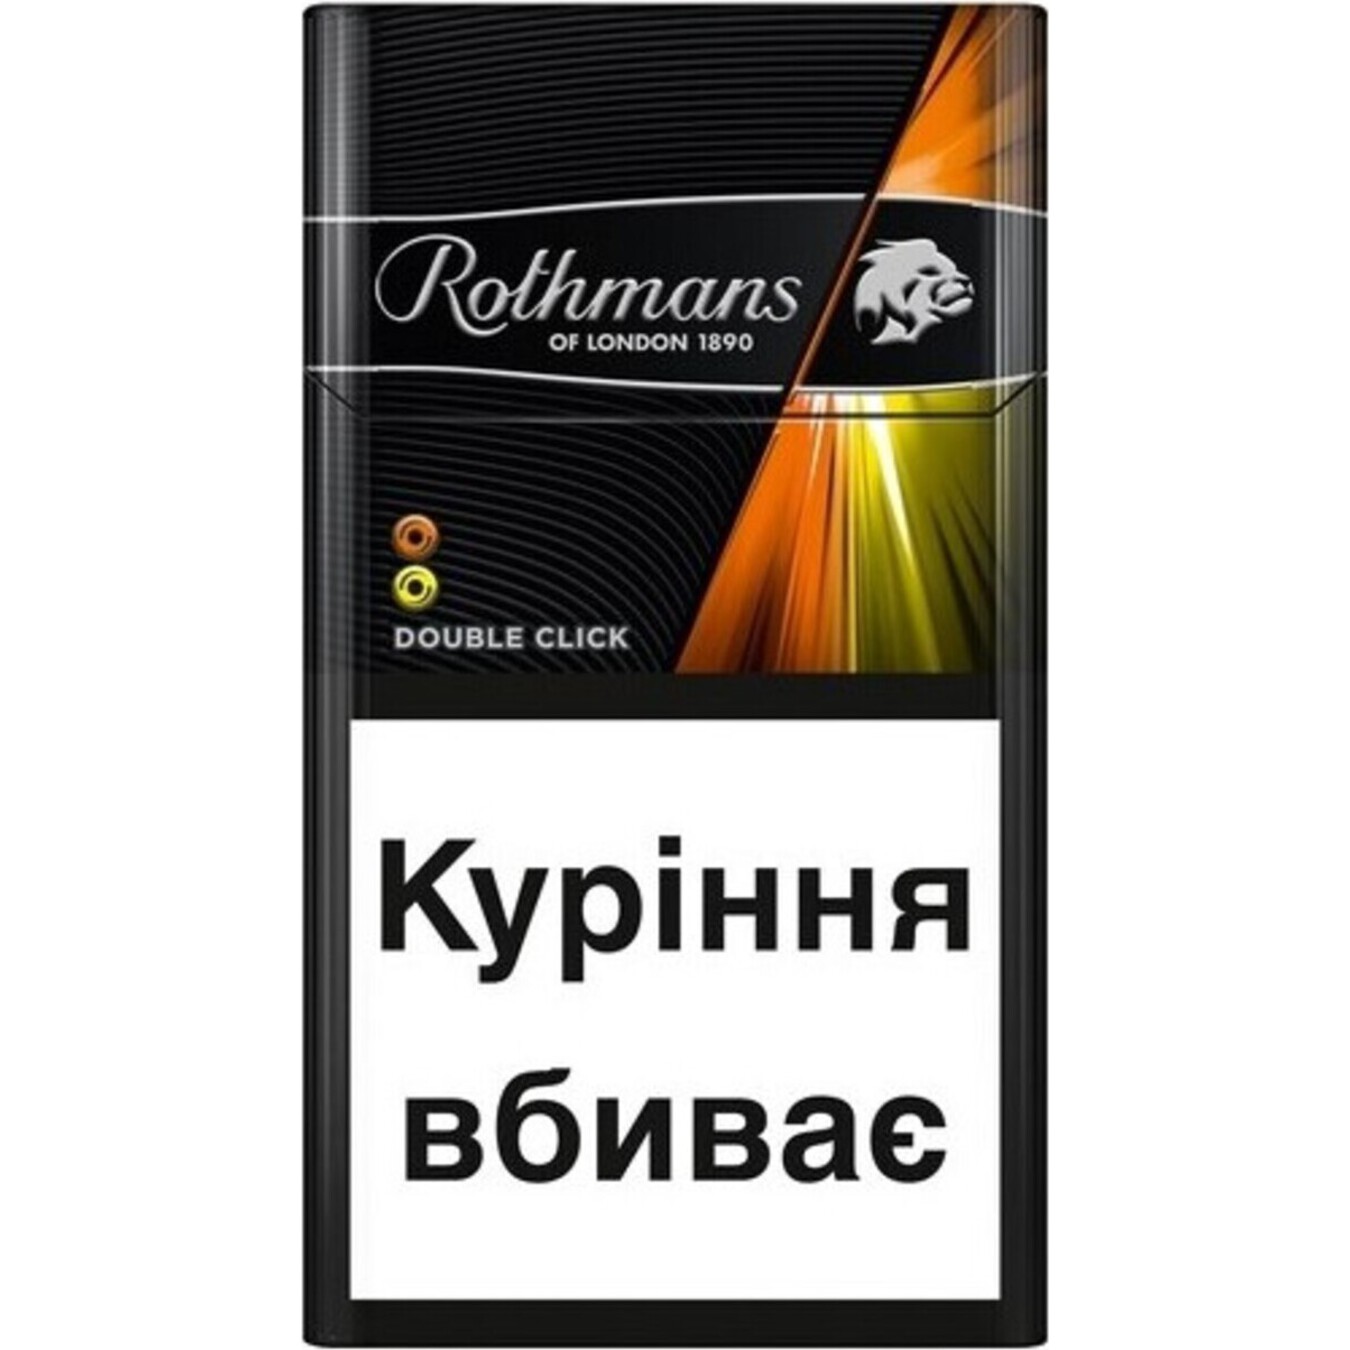 Rothmans Demi Double Click Cigarettes 20 pcs (the price is indicated without excise tax)